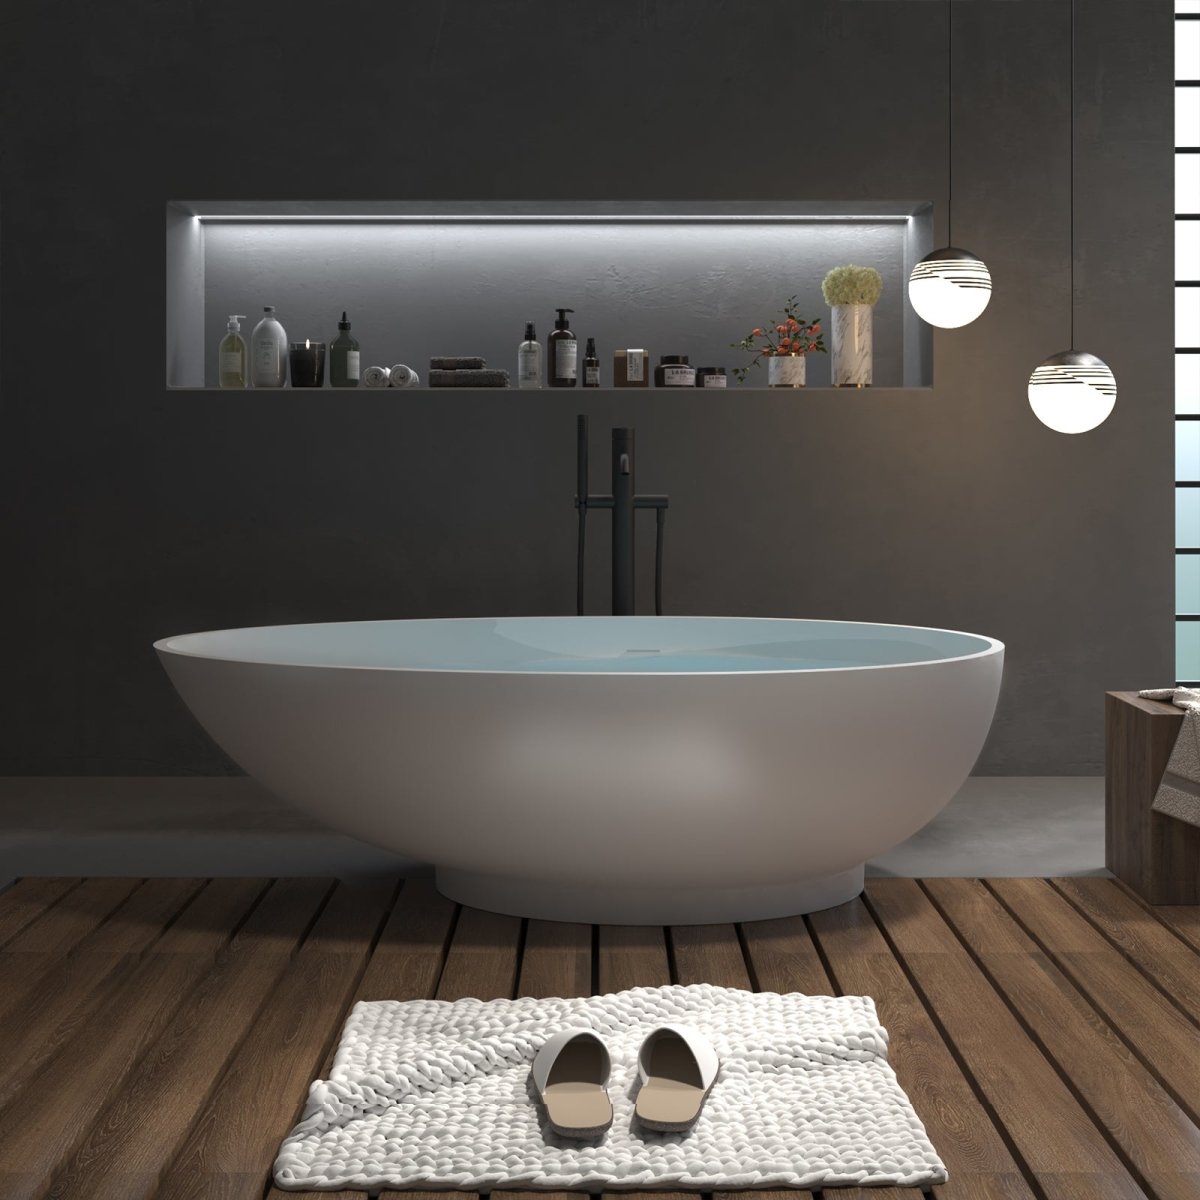 ExBrite 70" Soaking Bathtub Oval-shaped Free standing tub with Overflow